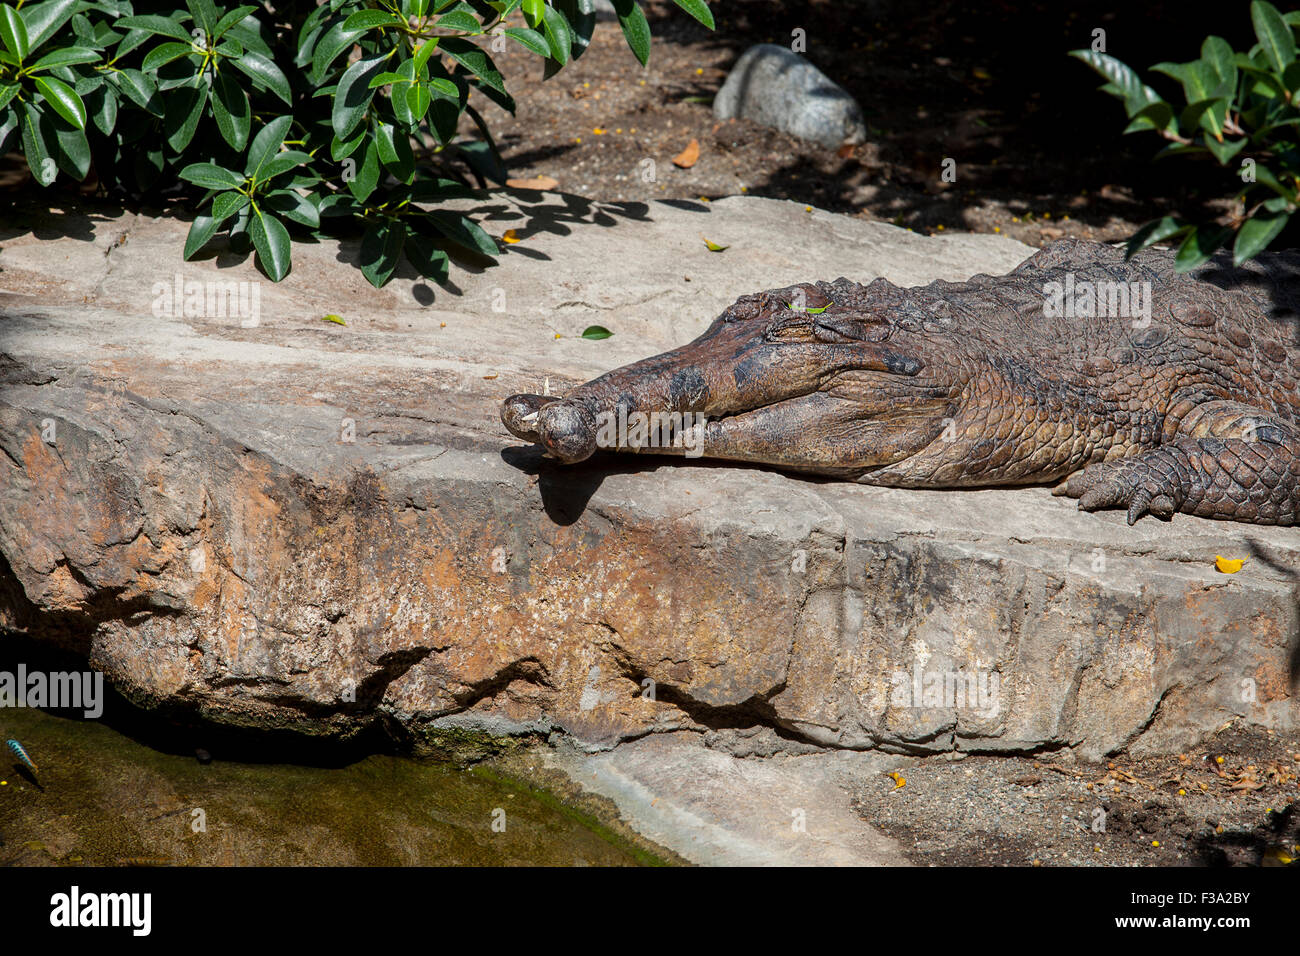 False gavial or Tomistoma schlegelii with crossed jaws, also known as the false gharial or Malayan gharial Stock Photo